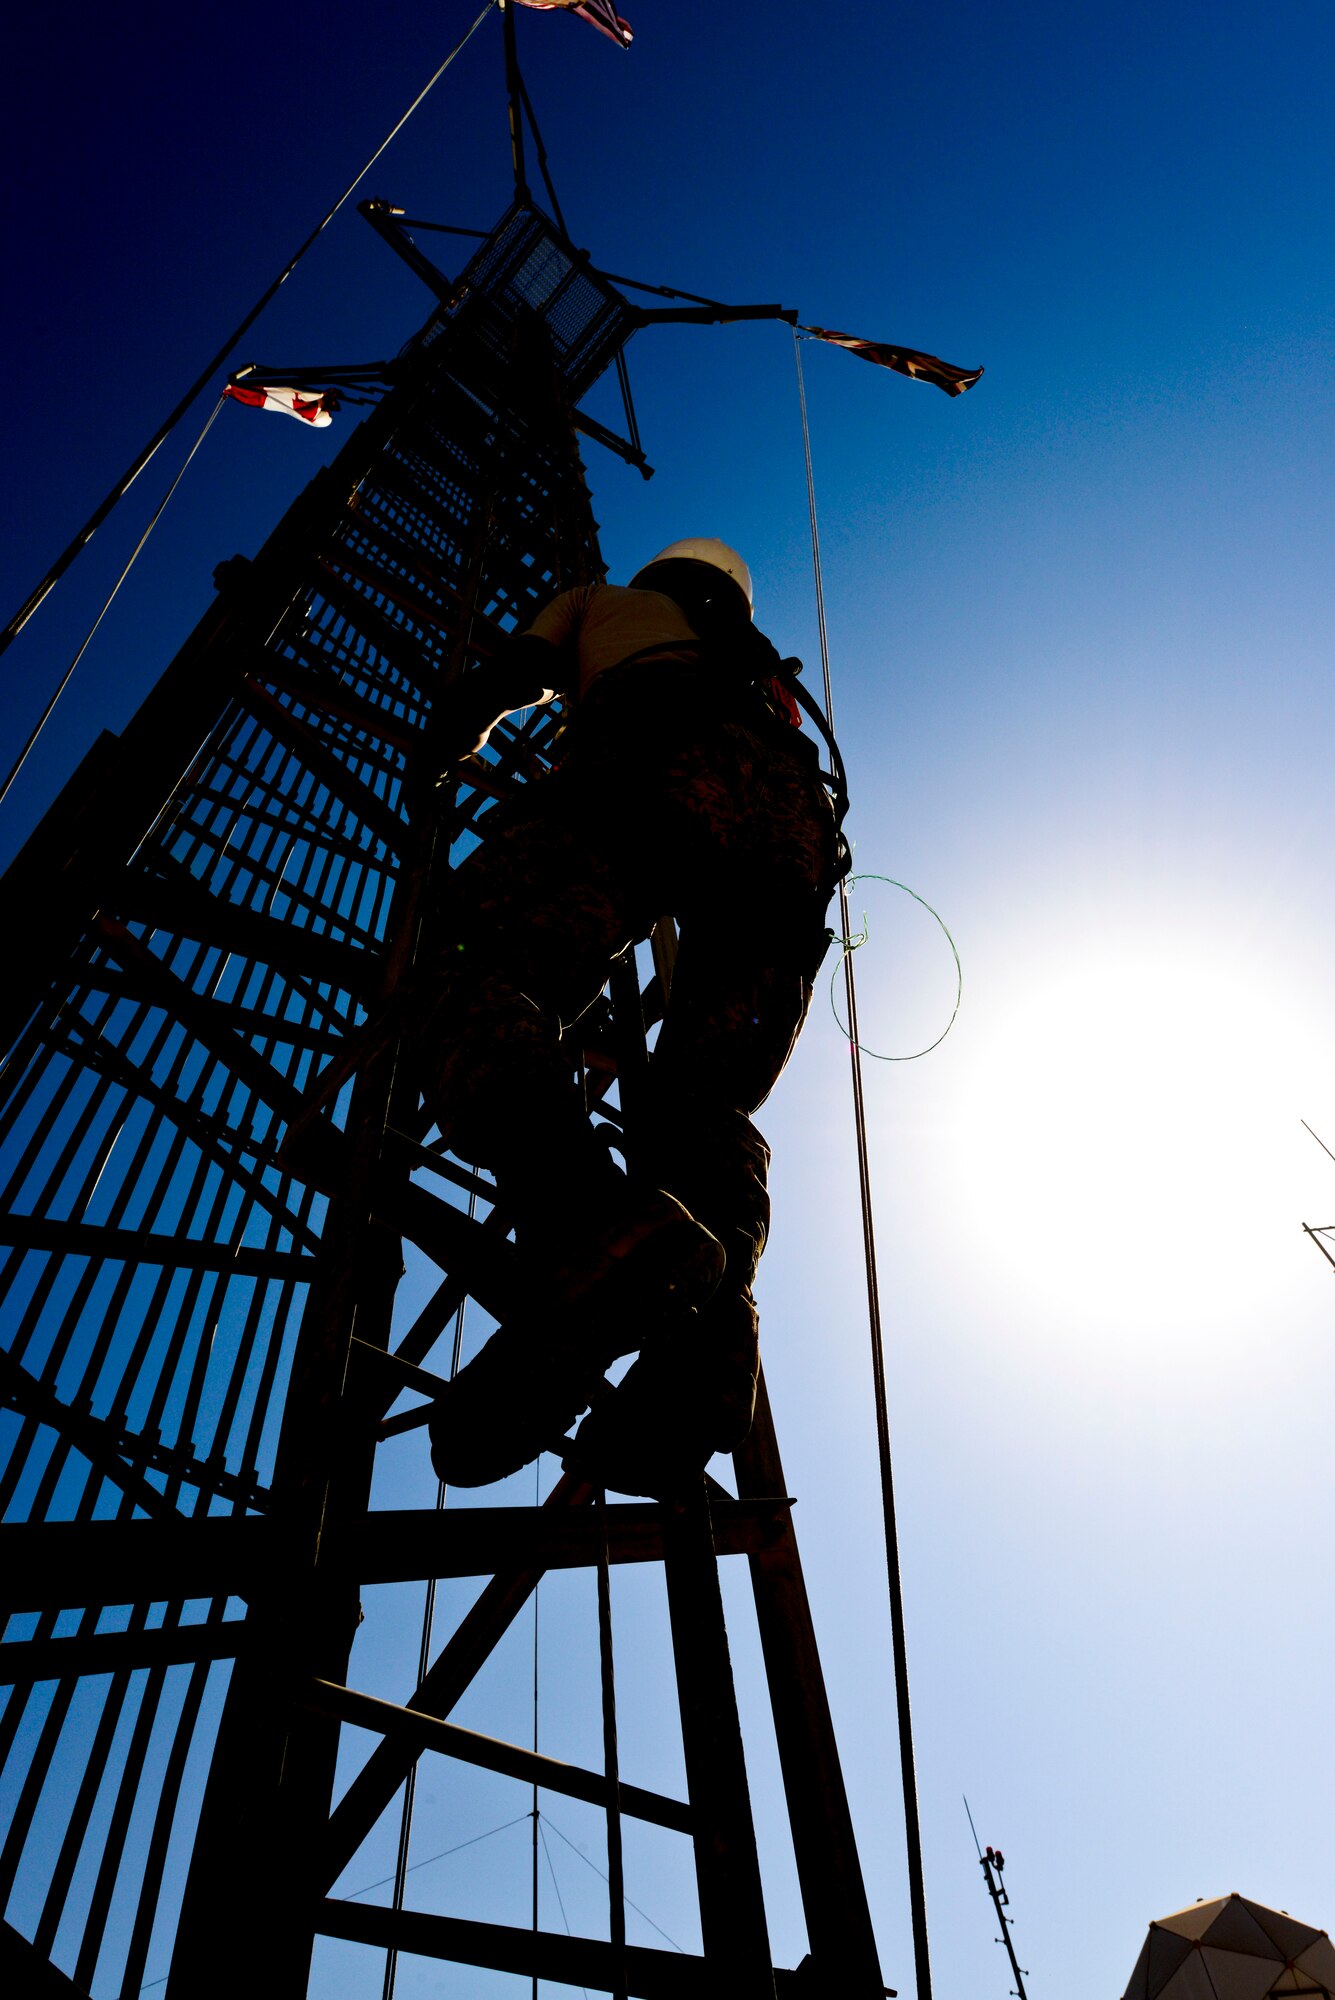 Senior Airman Wong Ly climbs an antenna tower at the 379th Air Expeditionary Wing in Southwest Asia, Oct. 30, 2013. Cable maintainers perform preventive maintenance inspections on antennas every six months. Ly is a 379th Expeditionary Communications Squadron cable and antenna maintainer deployed from Kadena Air Base Japan and a native of Hilo, Hawaii. (U.S. Air Force photo/Tech. Sgt. Joselito Aribuabo)